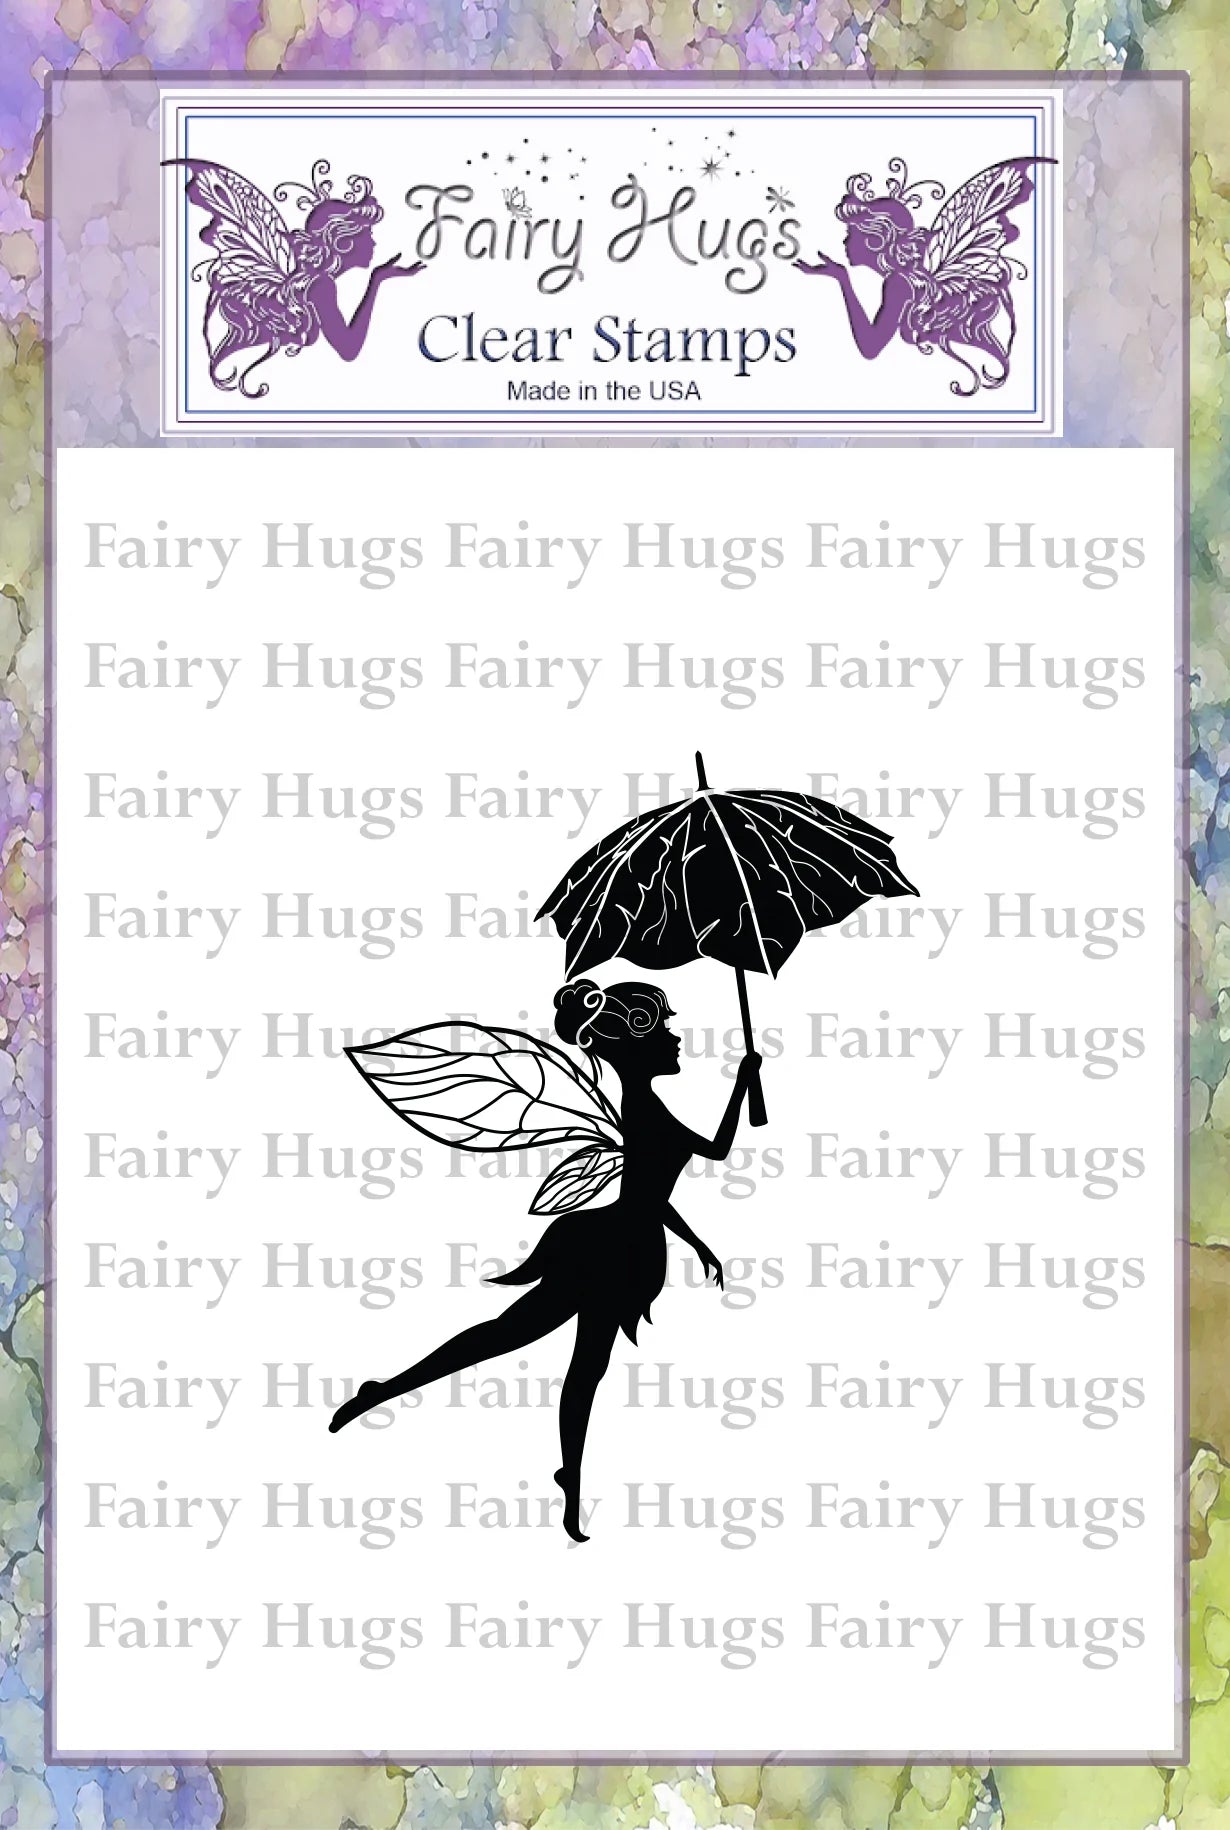 Fairy hugs - Clear Stamp - April